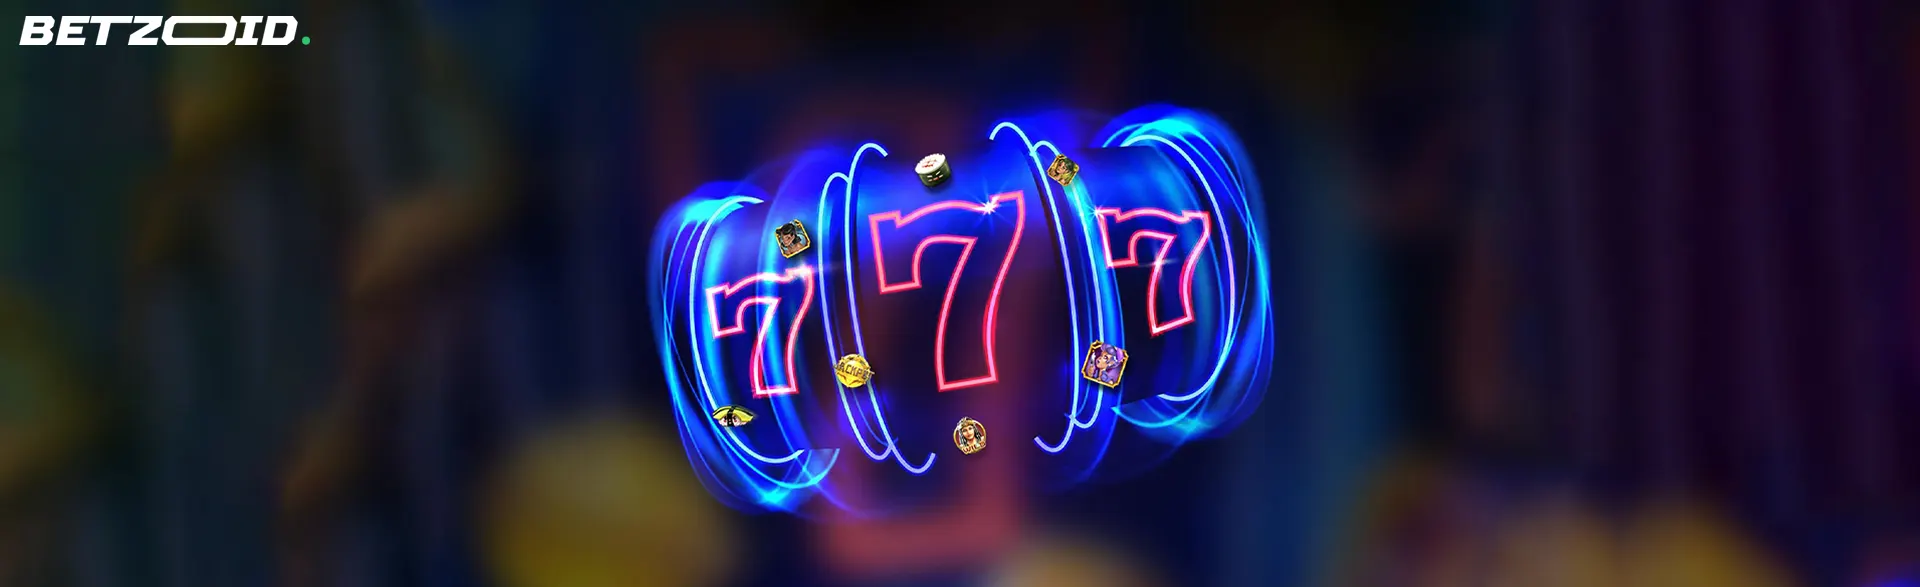 A glowing slot machine with spinning reels displaying '777' symbols, representing the best welcome bonus casino offers in Canada.